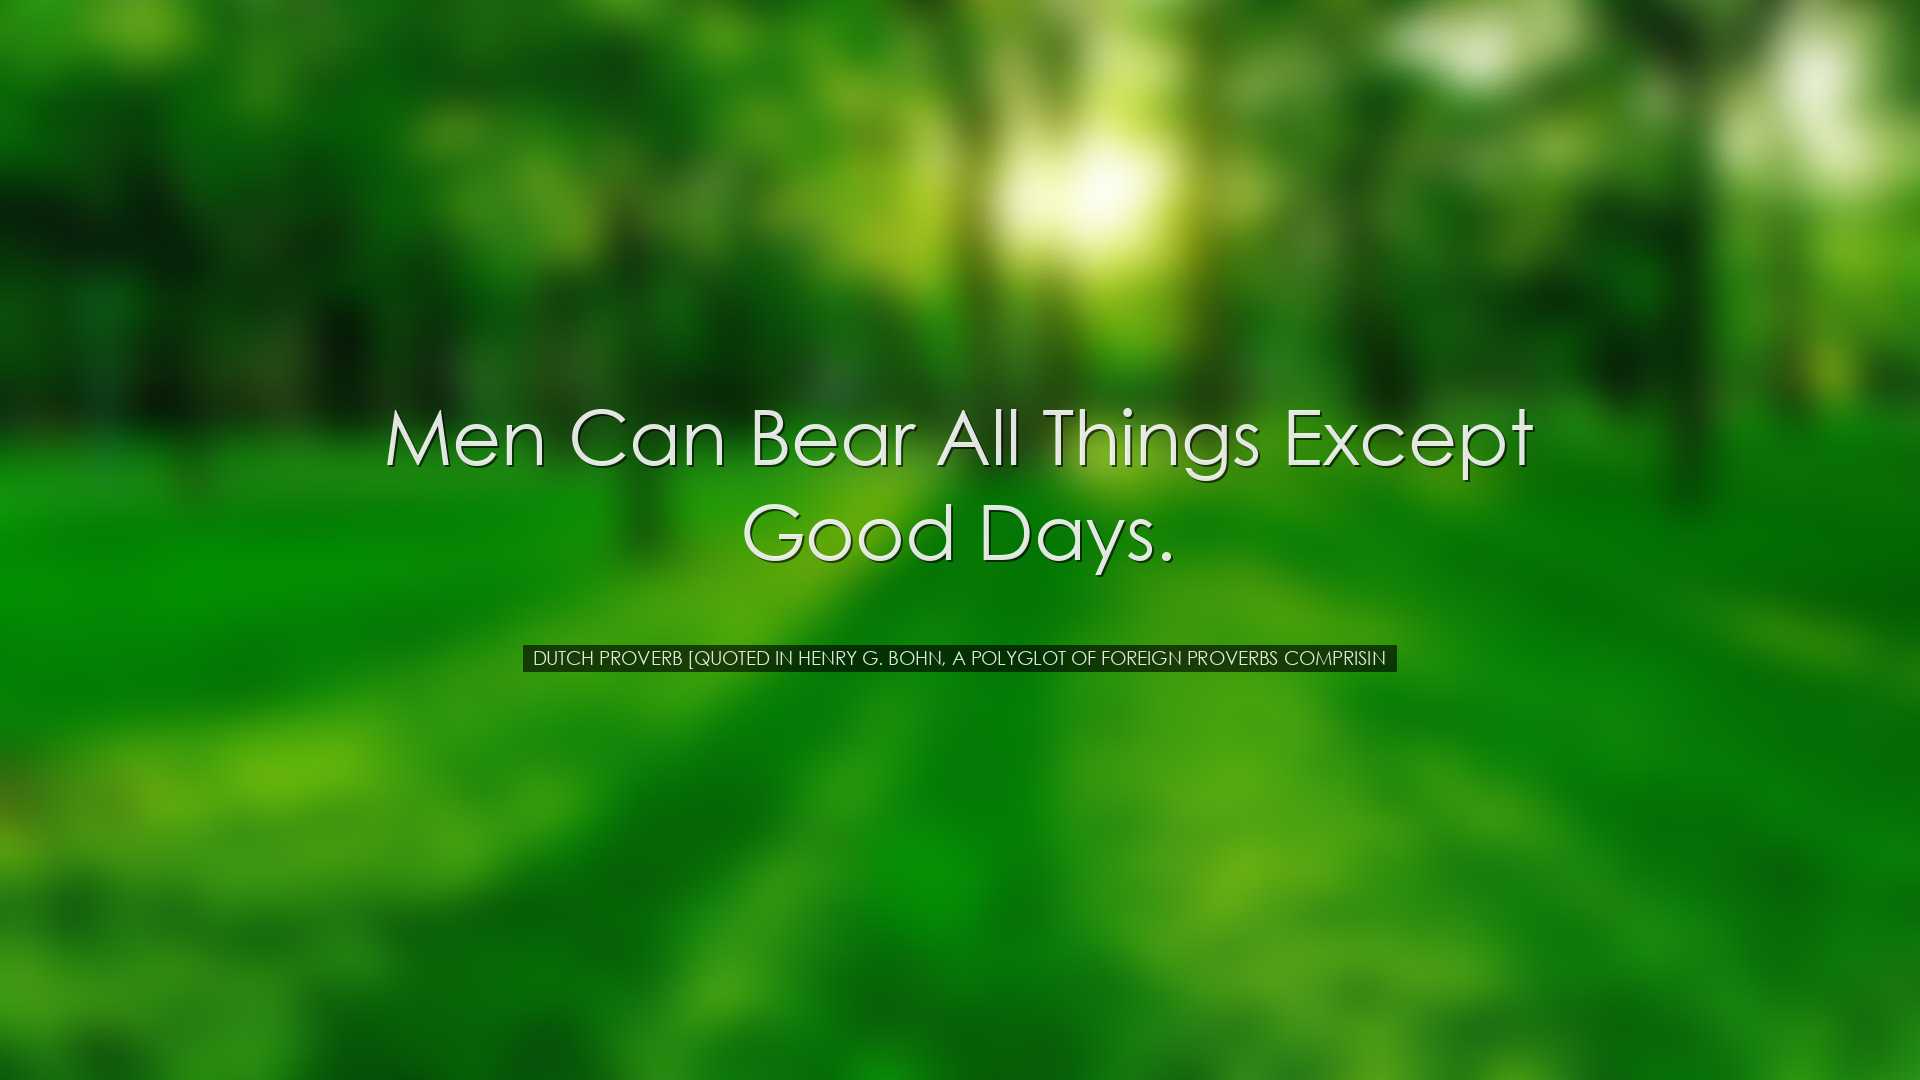 Men can bear all things except good days. - Dutch Proverb [Quoted